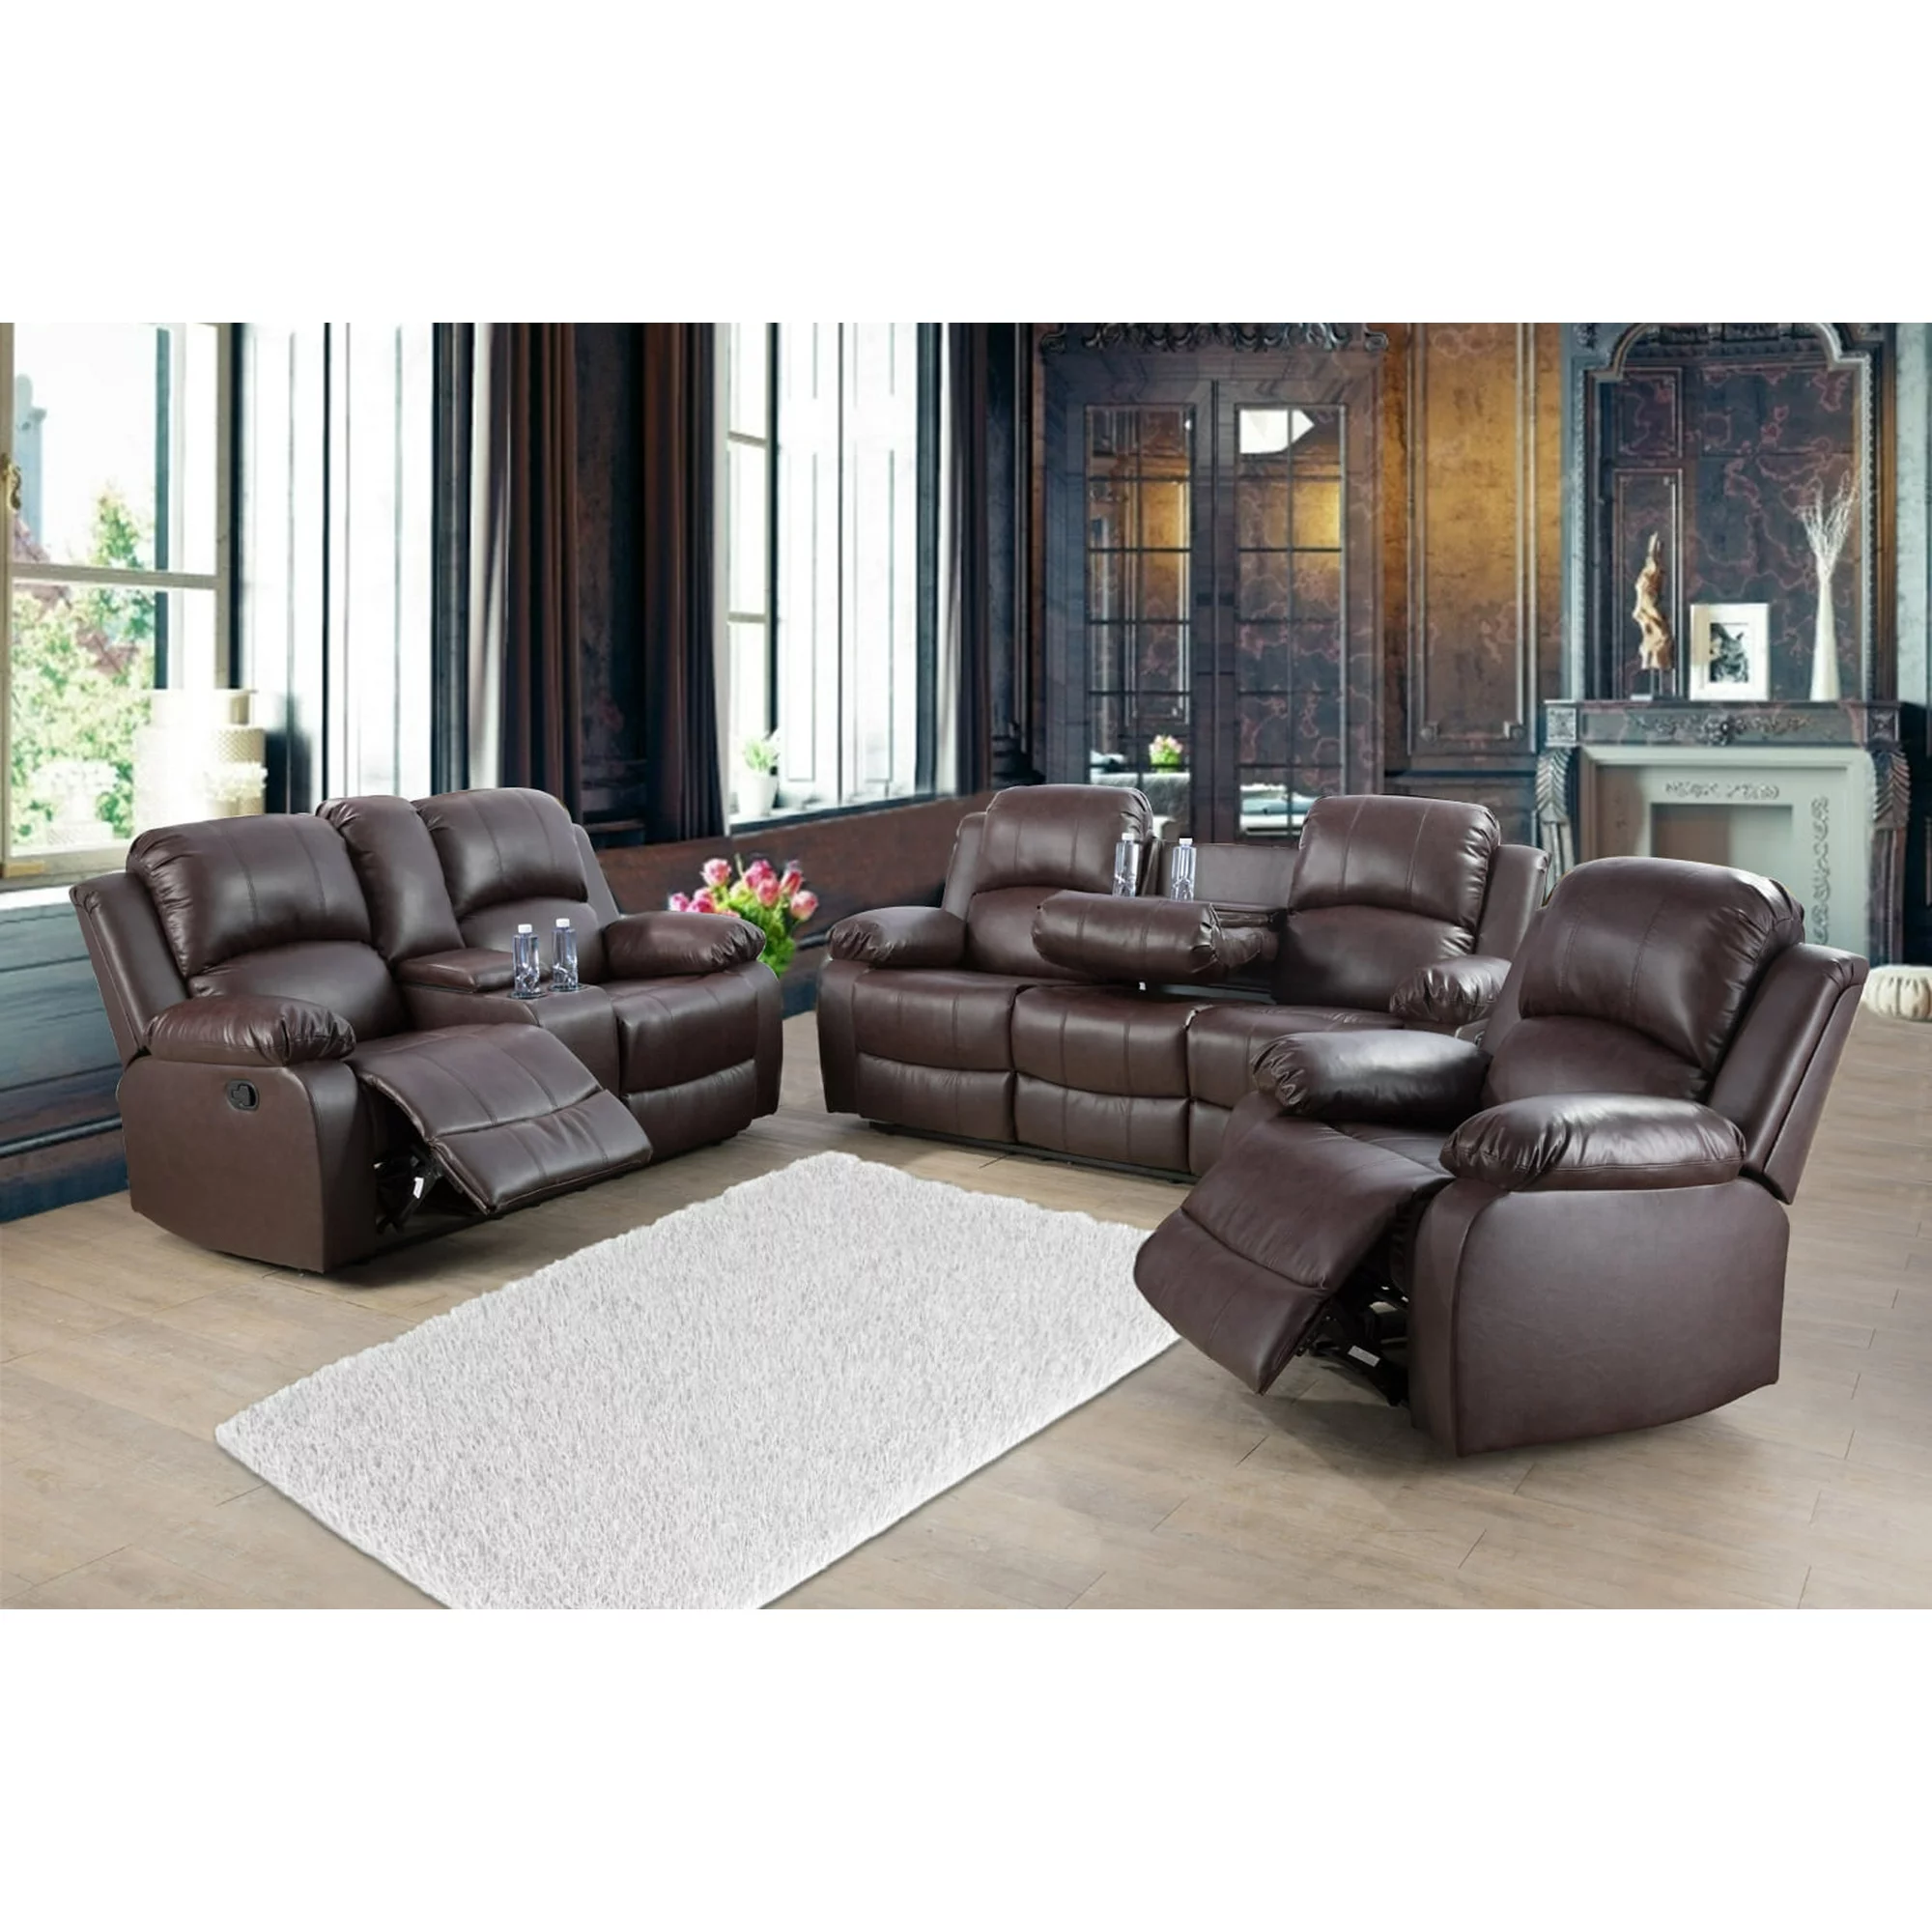 Ainehome 3-Pcs Recliner Sectional Sofa Set Brown Bonded Leather